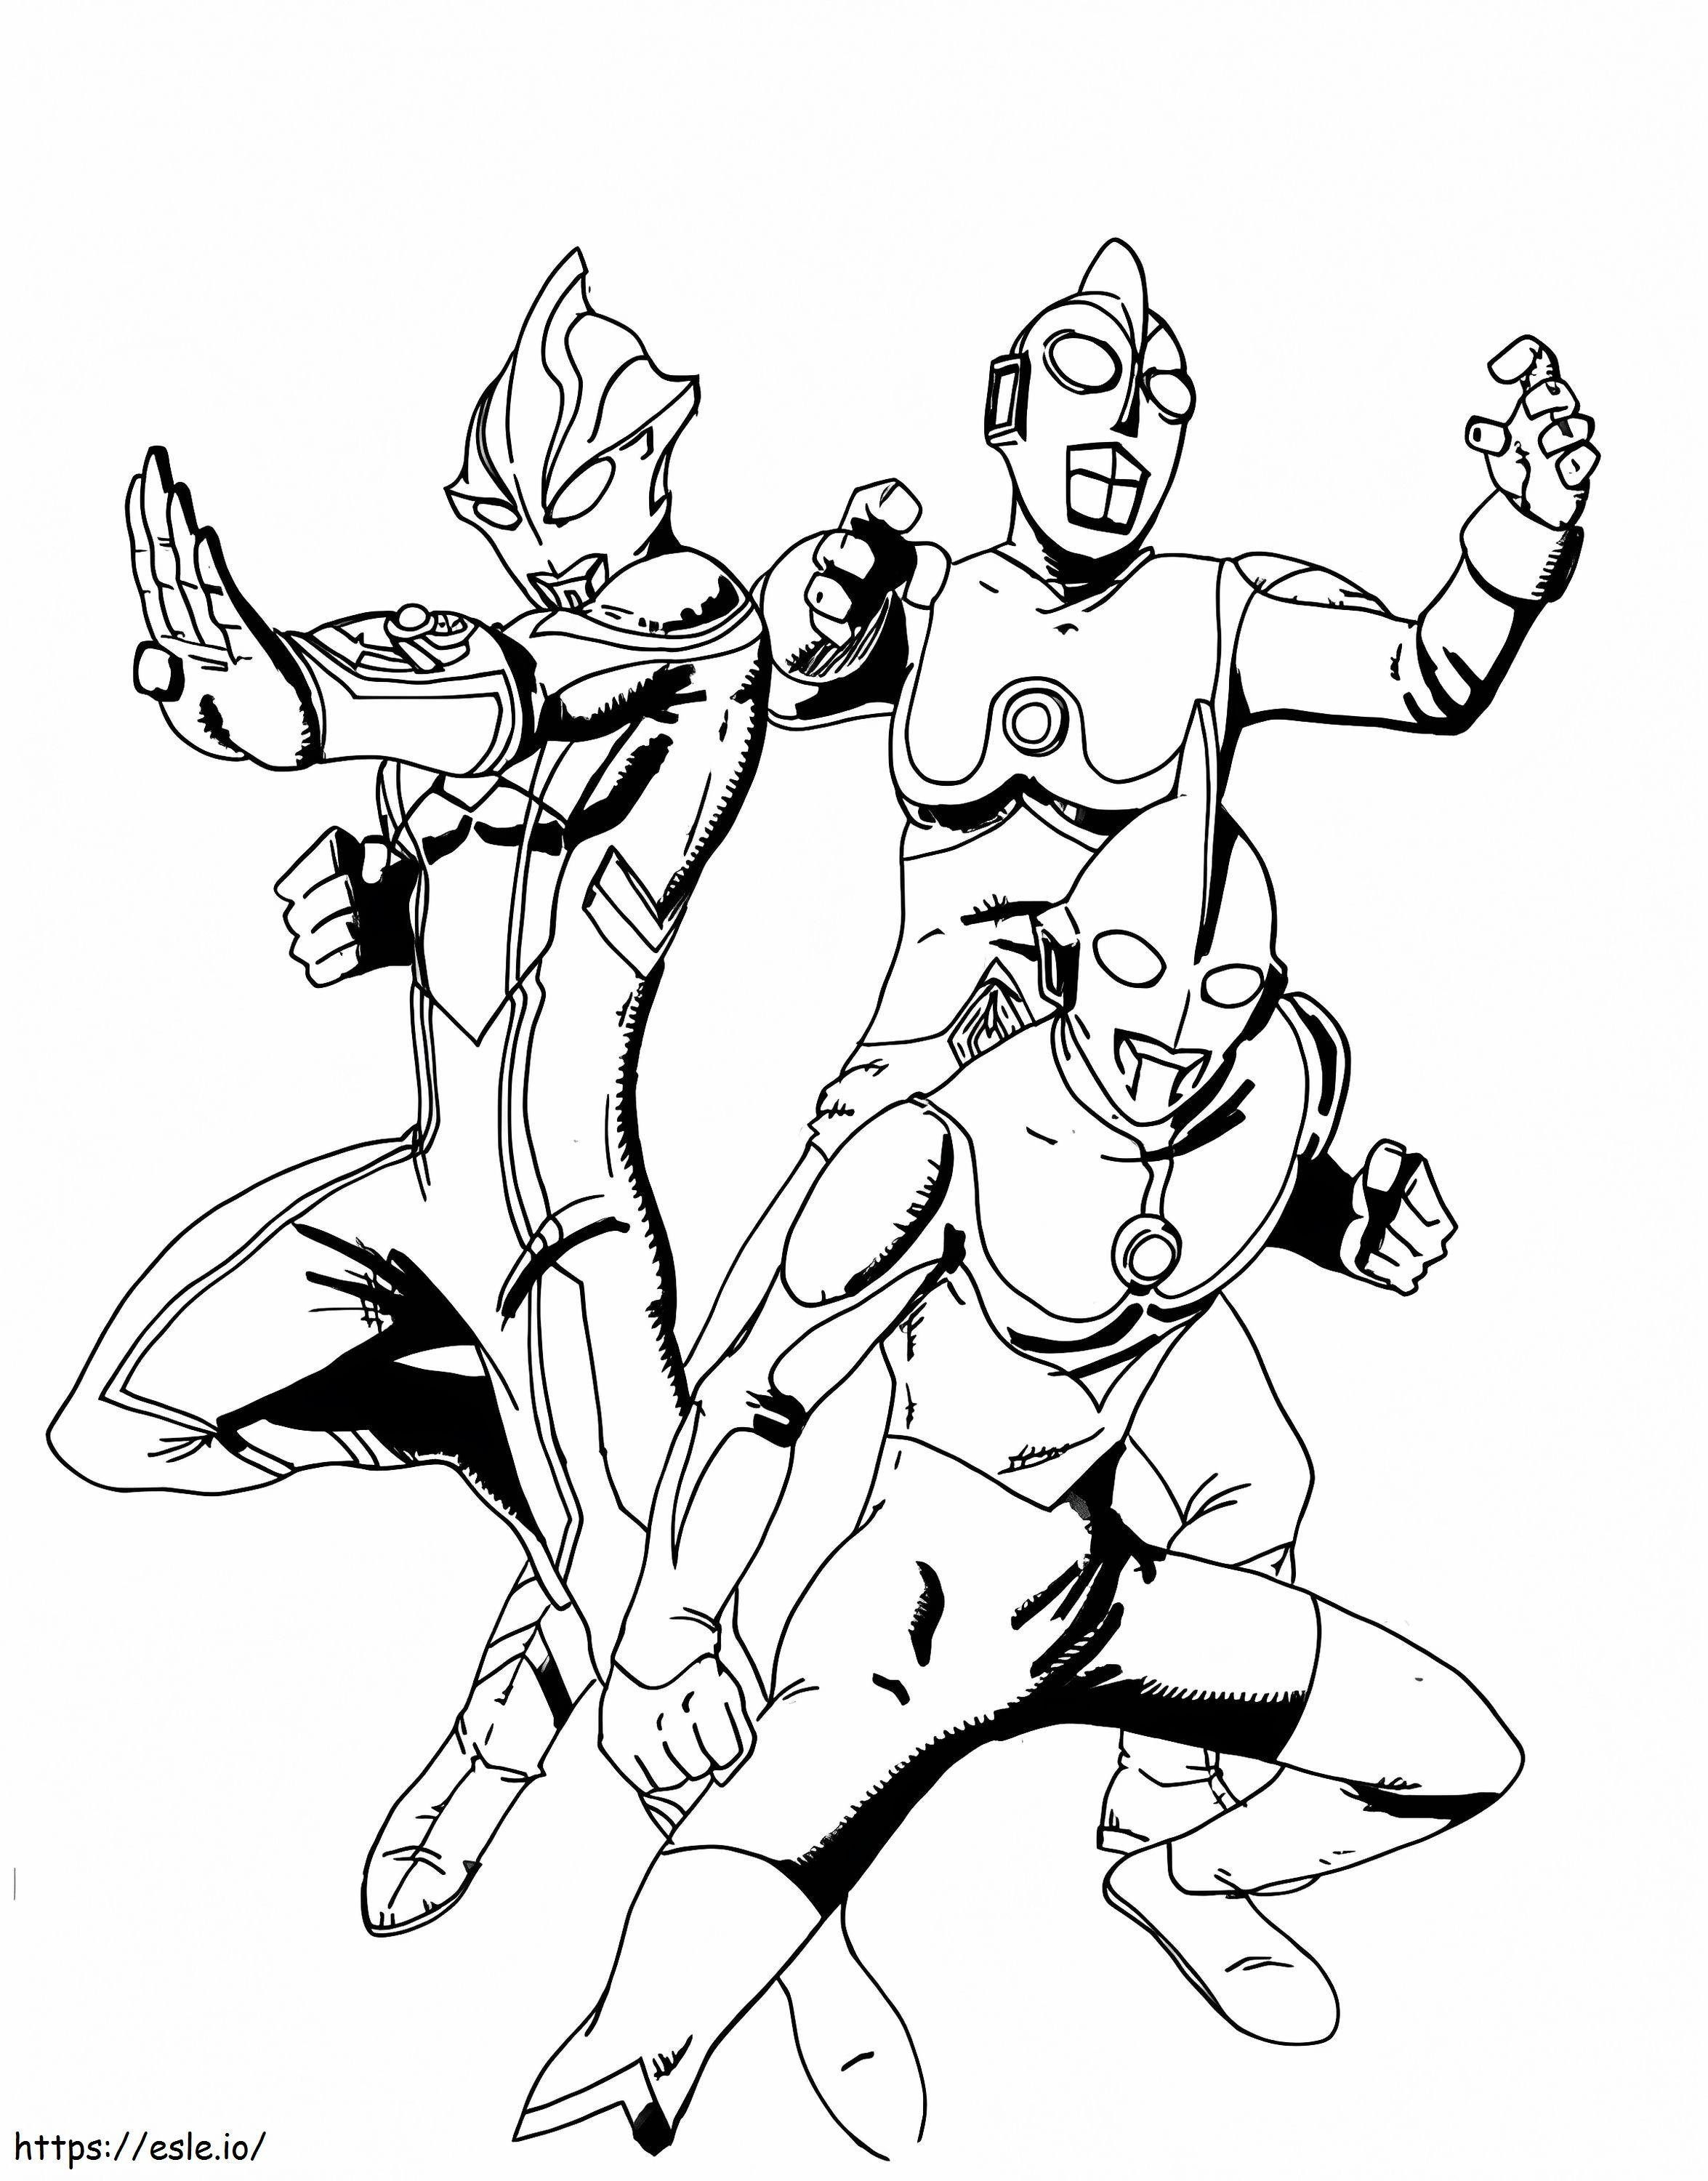 Ultraman Team 4 coloring page